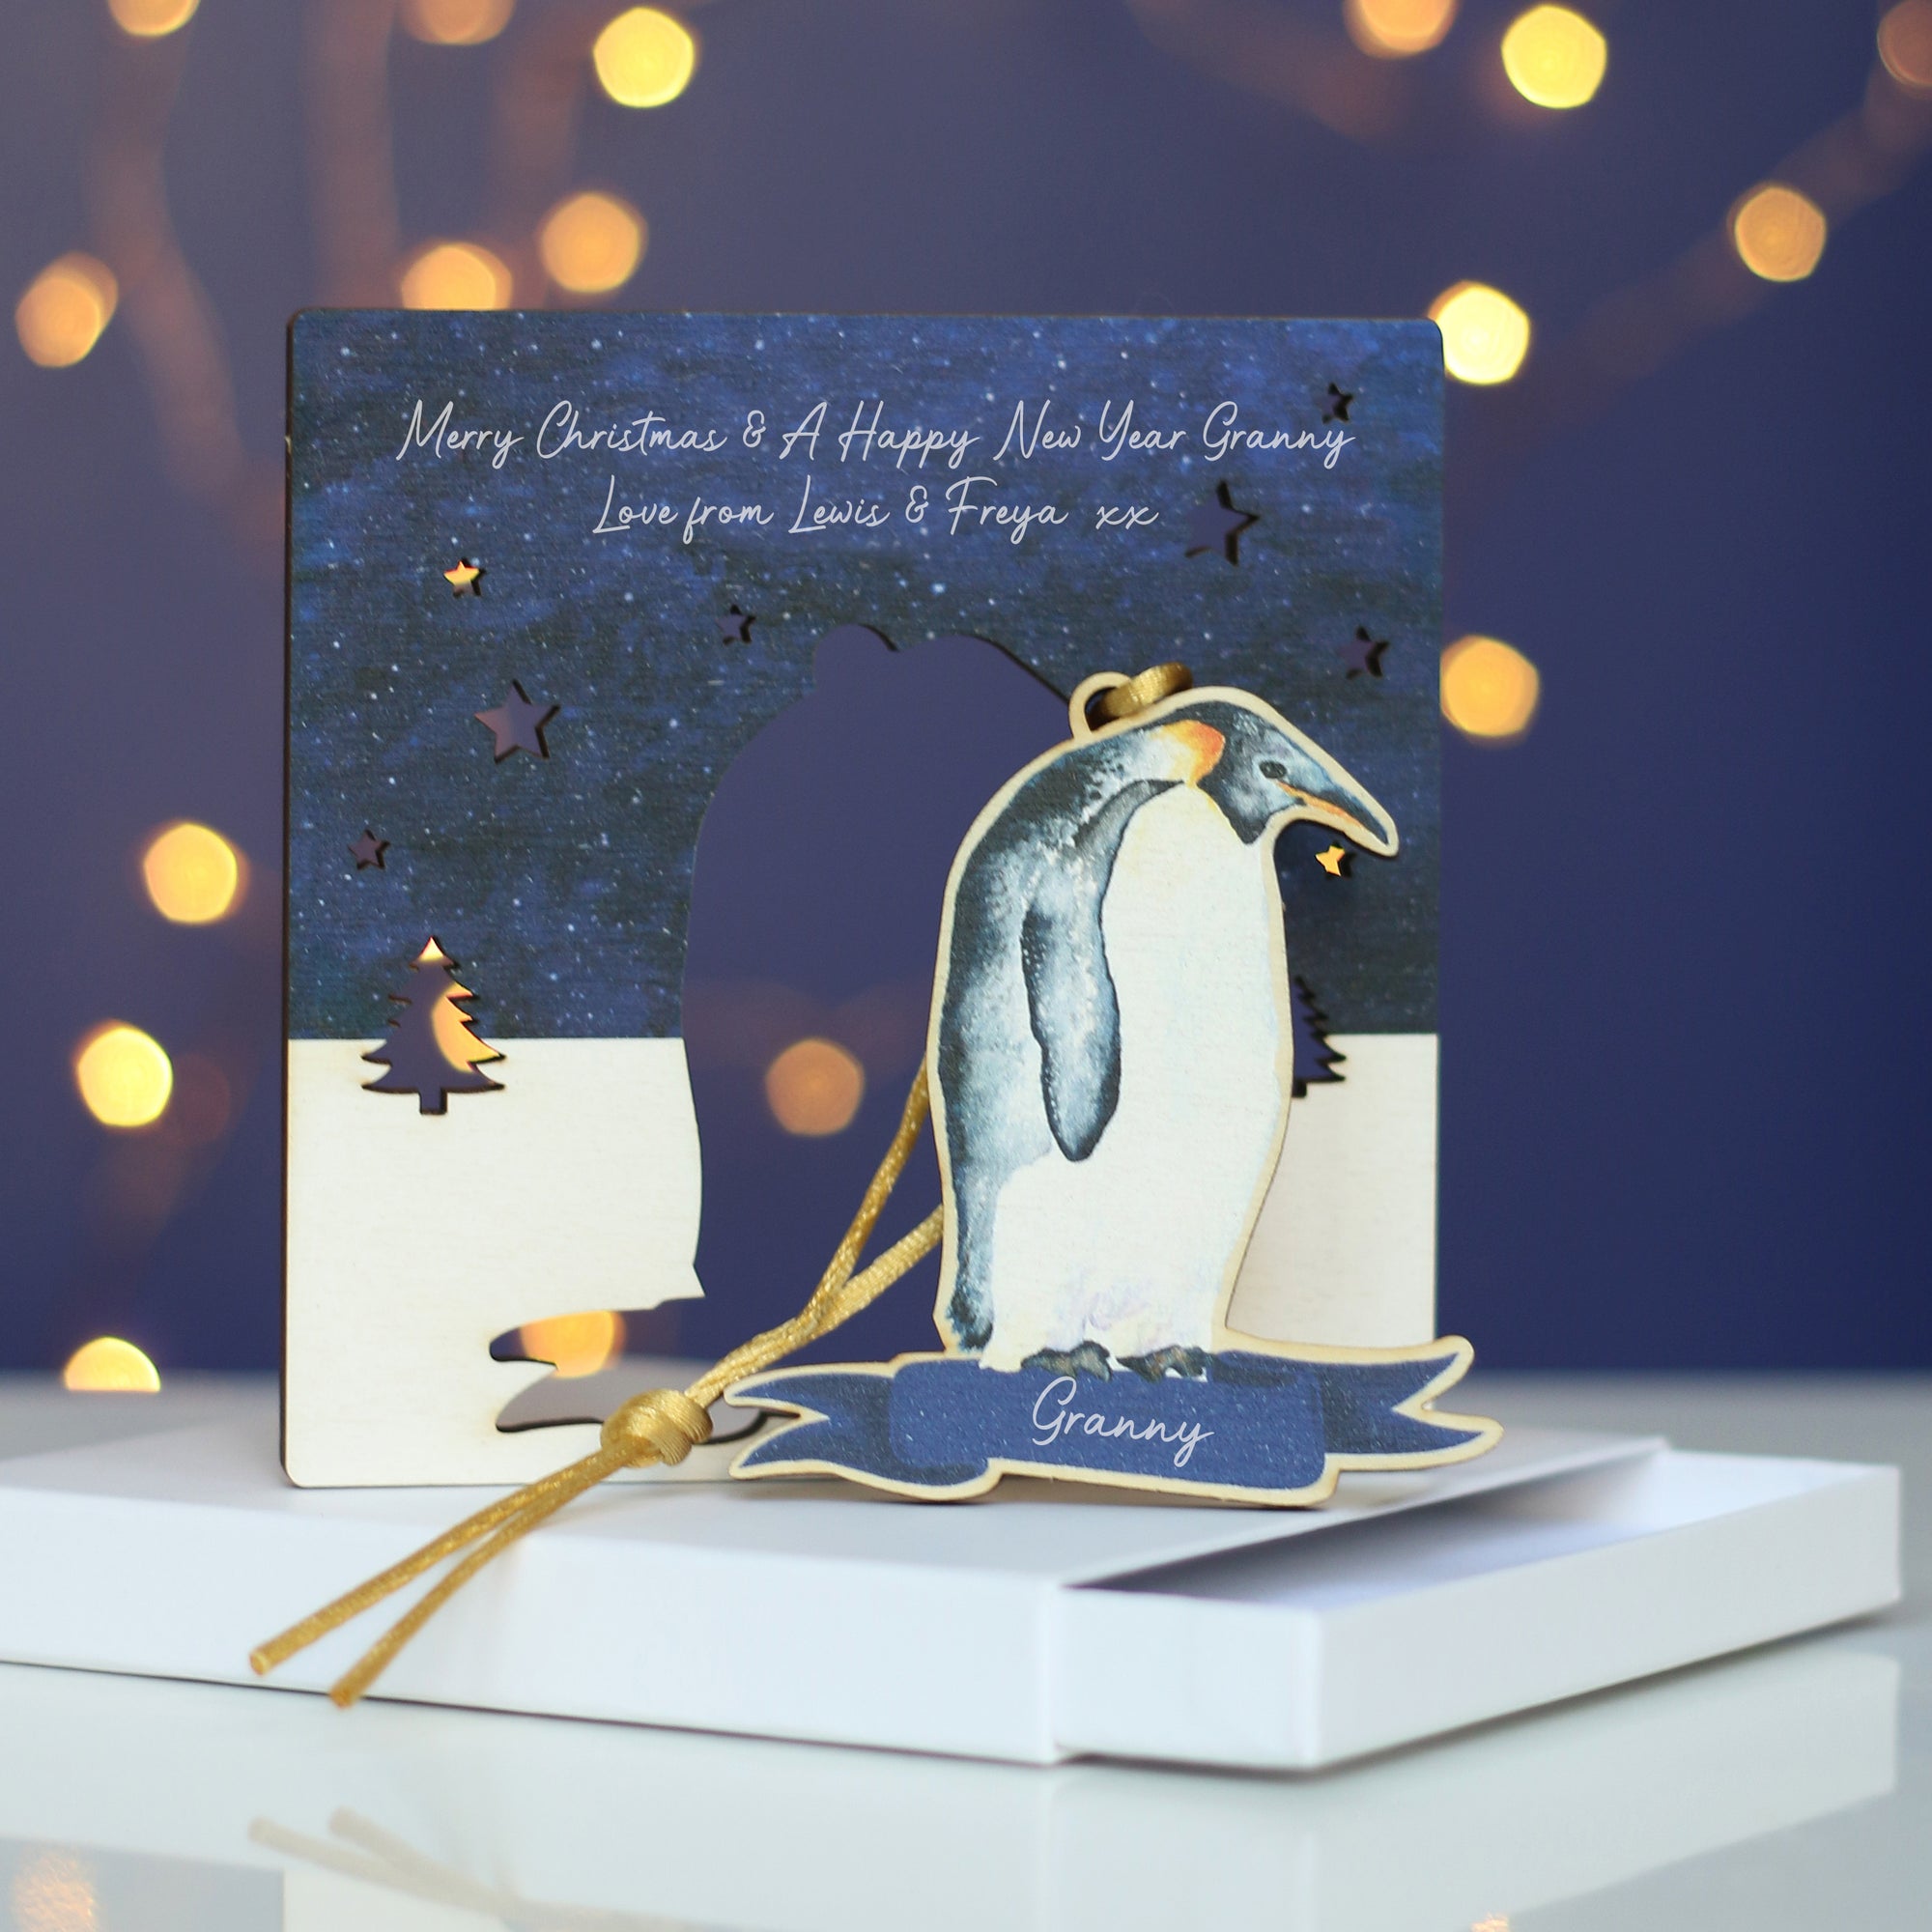 A wooden penguin Christmas decoration, with the name Granny, stands on a white gift box. The penguin has been "popped out" of a wooden surround that is also an alternative Christmas card. In the background there is a blue wall and twinkly lights 